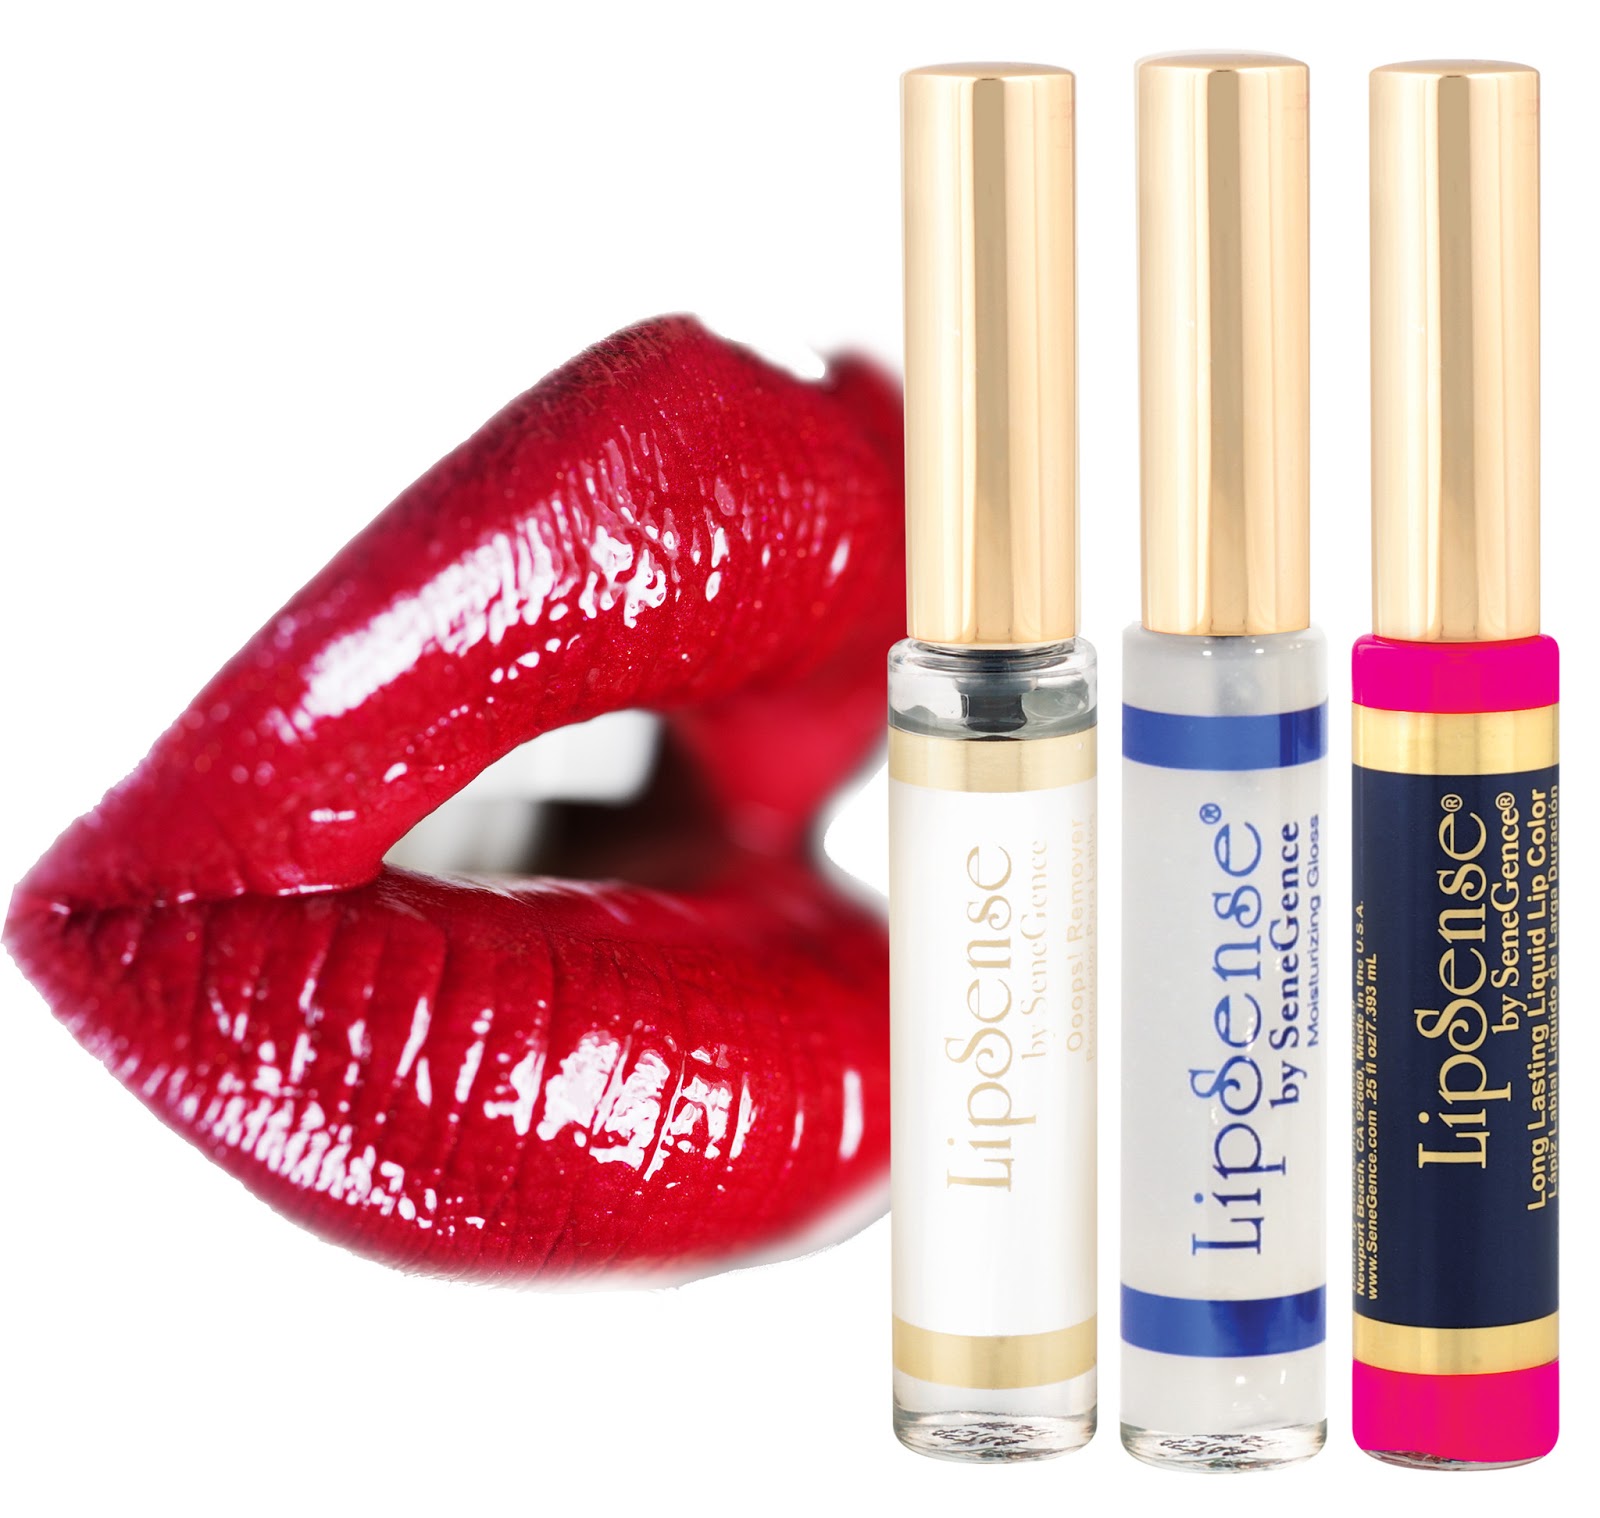 Silver Lining: an unpaid review of LipSense
